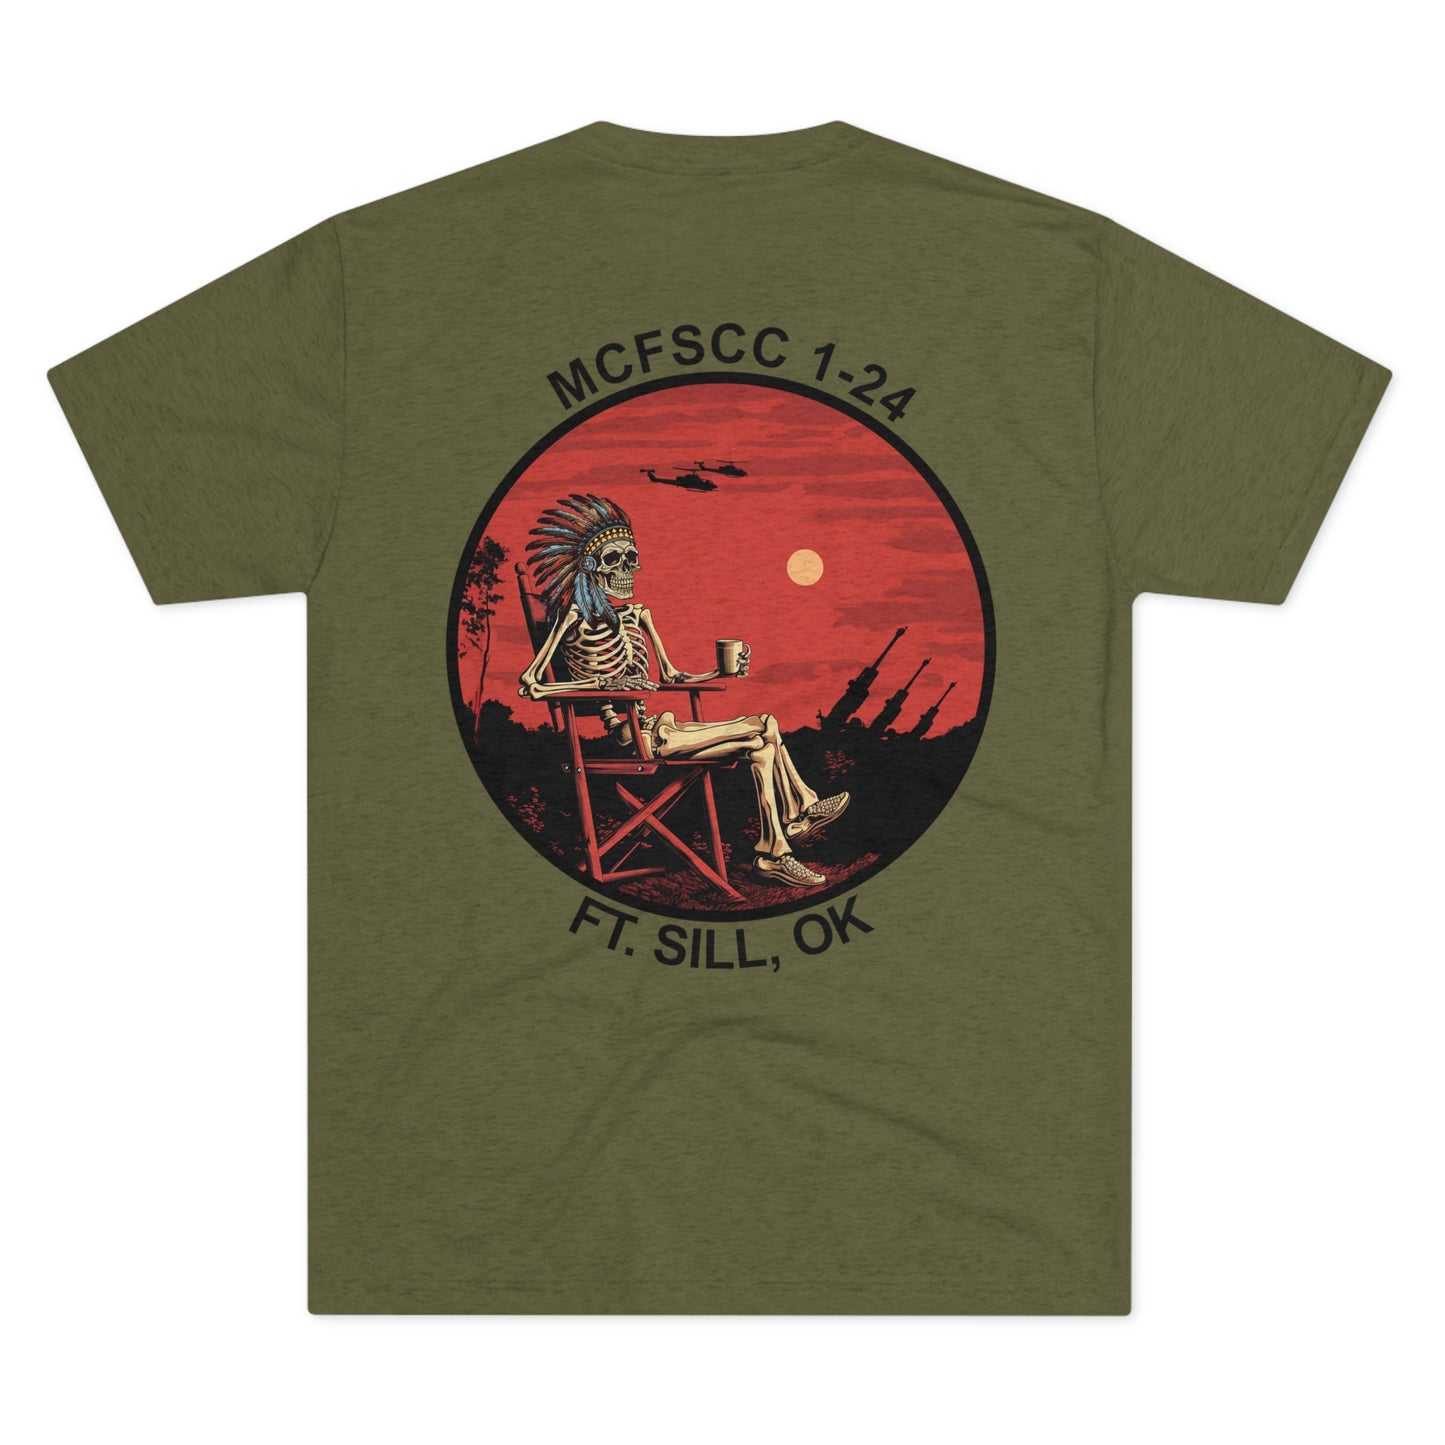 MCFSCC 1-24 Athletic Tee